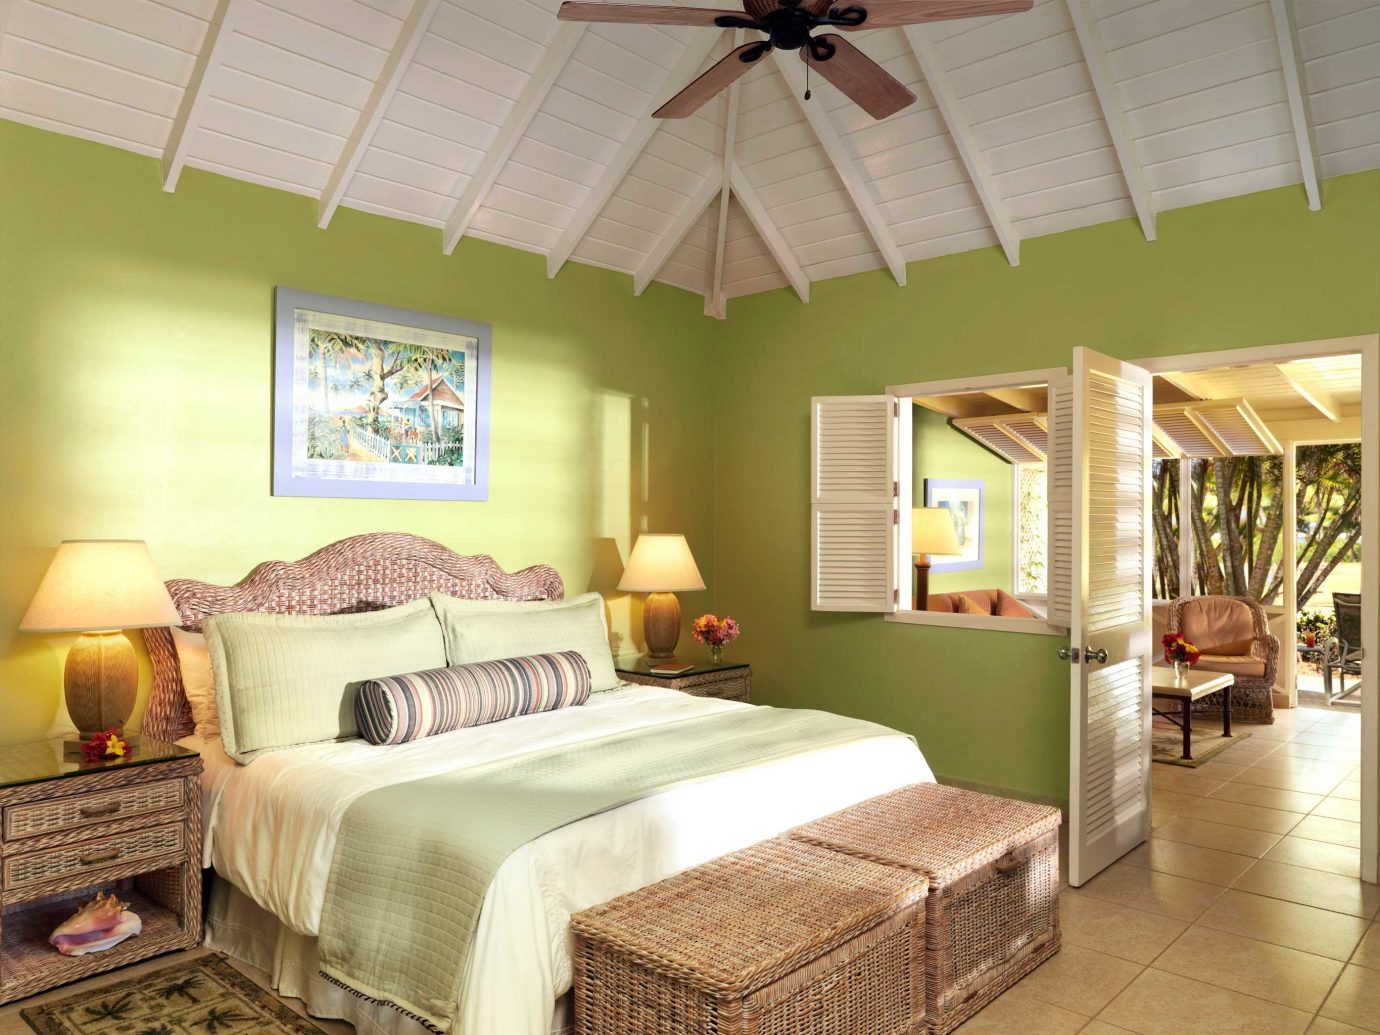 Balcony Beach Bedroom Hotels Islands Living Lounge Luxury Luxury Travel Suite Trip Ideas indoor floor wall room property ceiling estate bed home interior design cottage real estate living room furniture farmhouse Villa Resort area